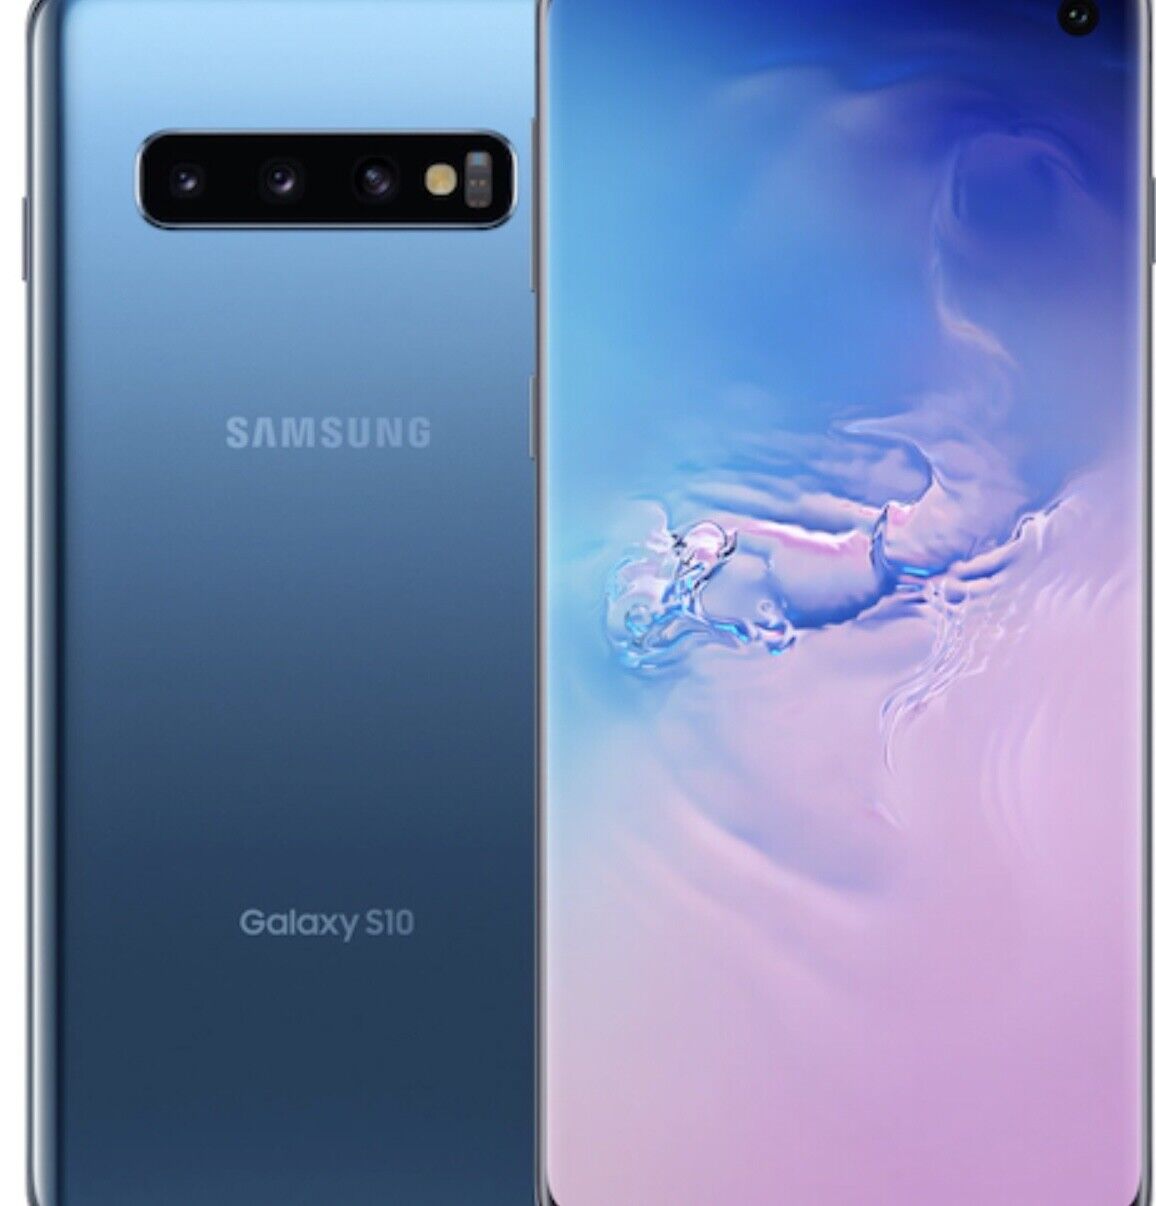 New in Box Samsung Galaxy S10 SM-G973U Blue GSM Unlocked for ATT and T-Mobile